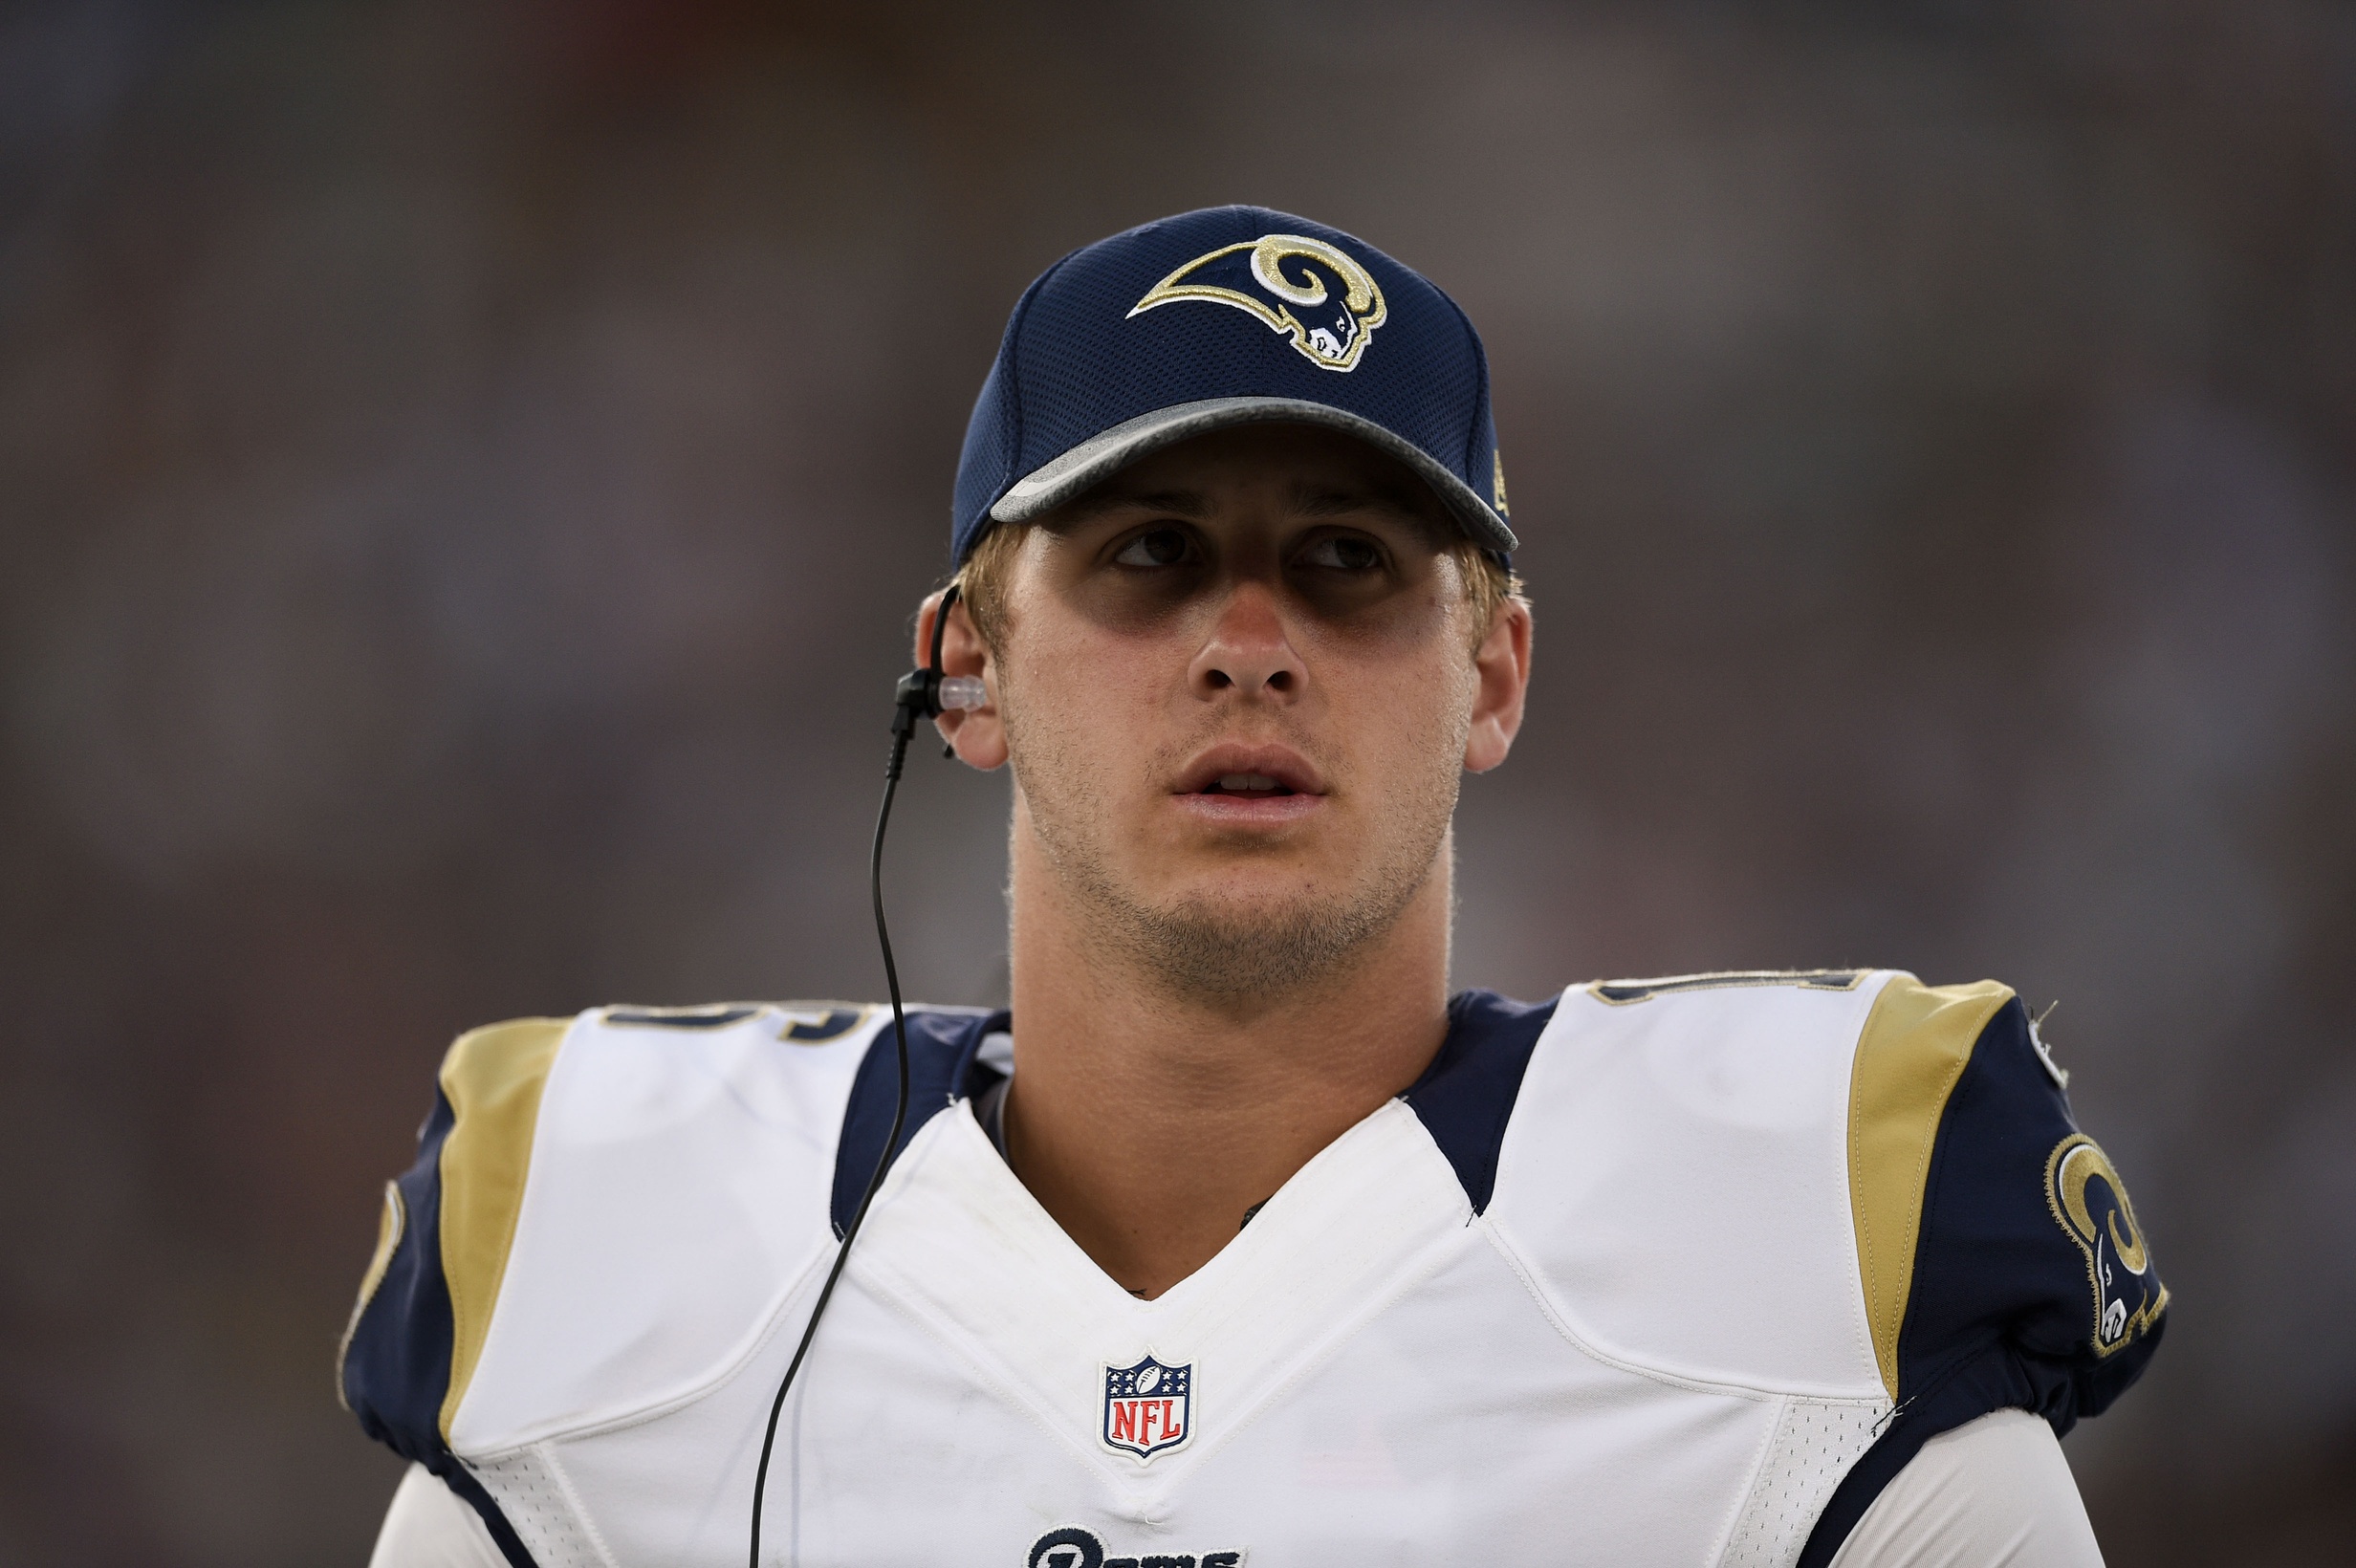 hyped NFL players, Jared Goff